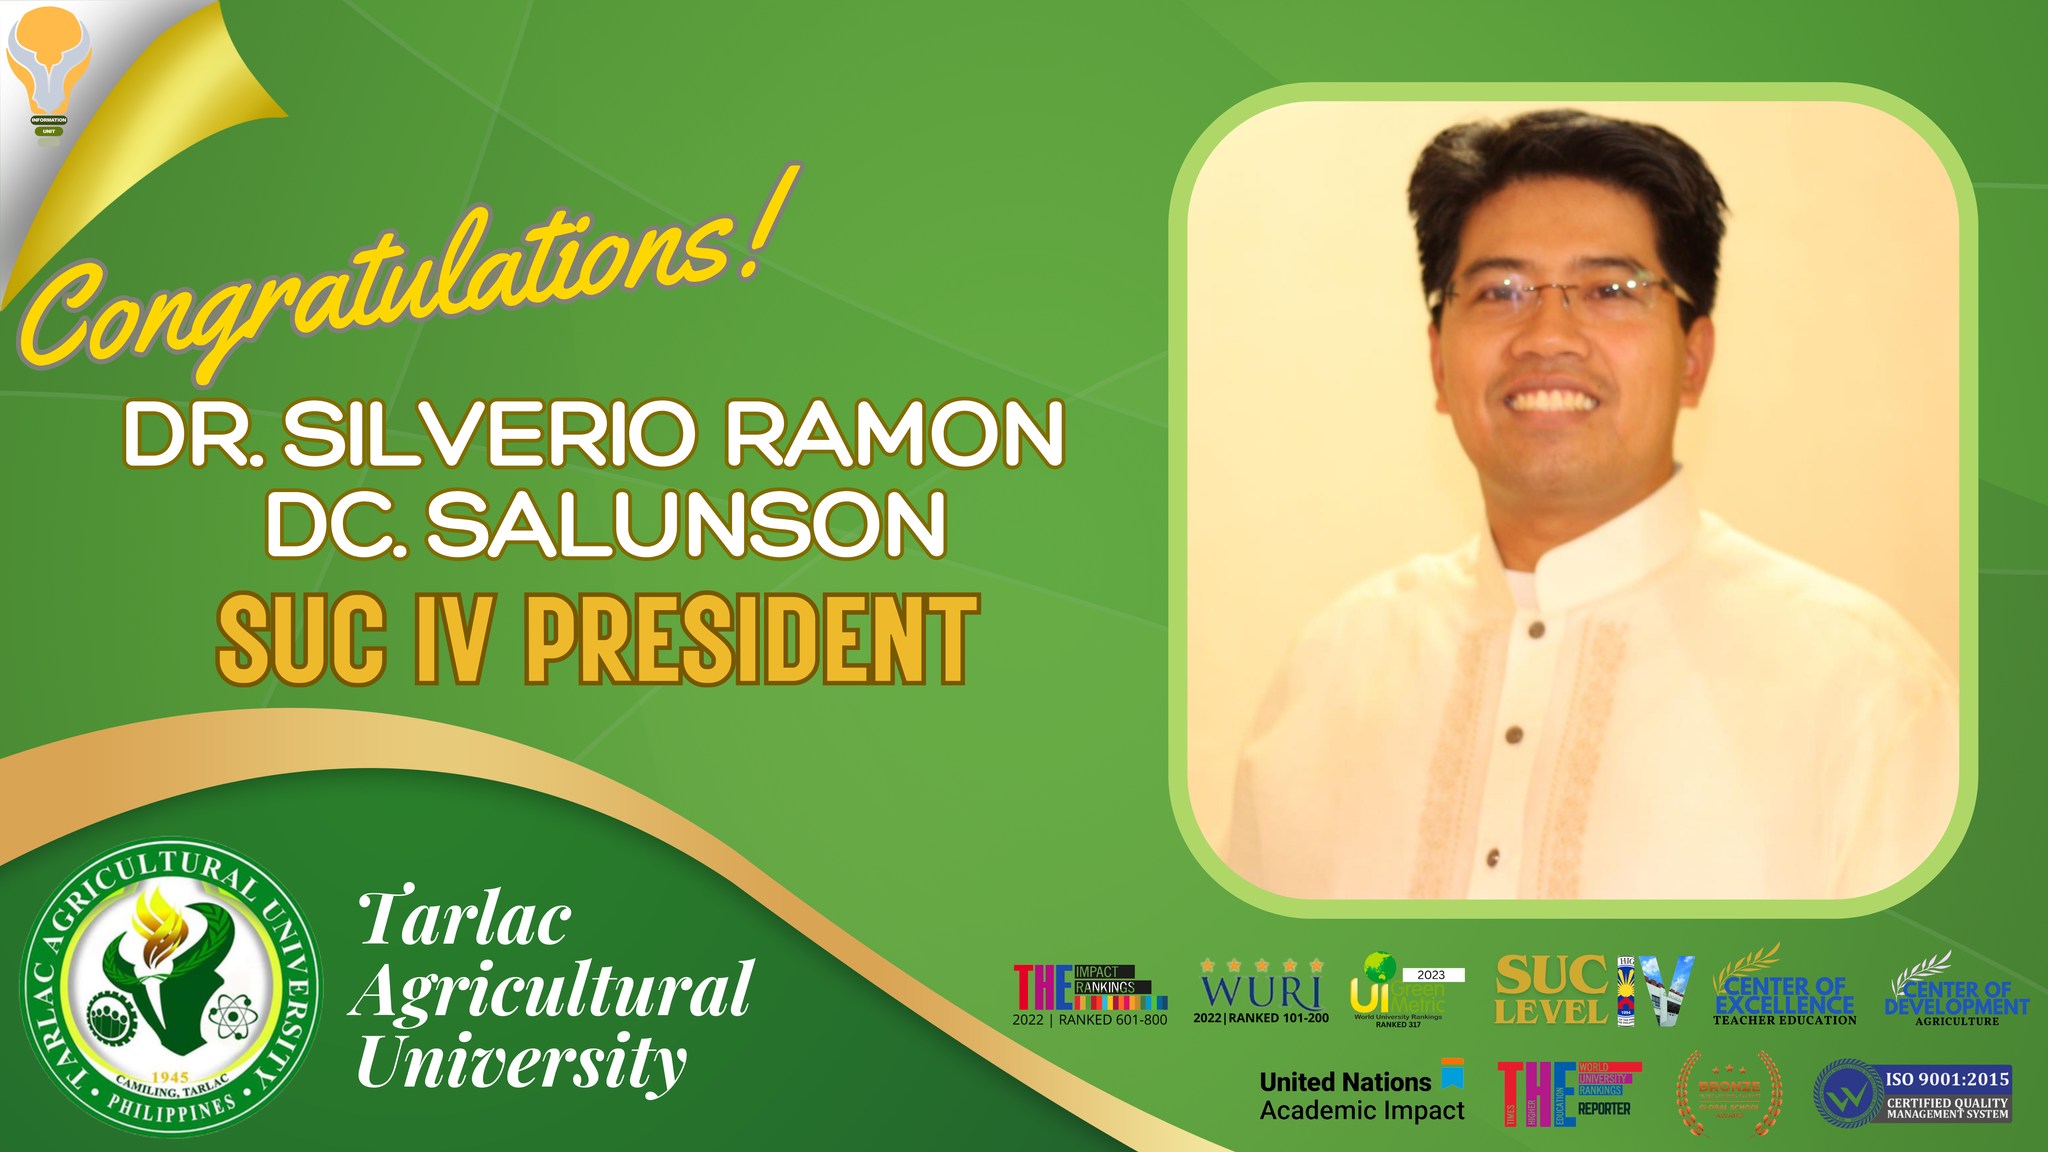 TAU community now welcomes its new president- Dr. Silverio Ramon DC. Salunson